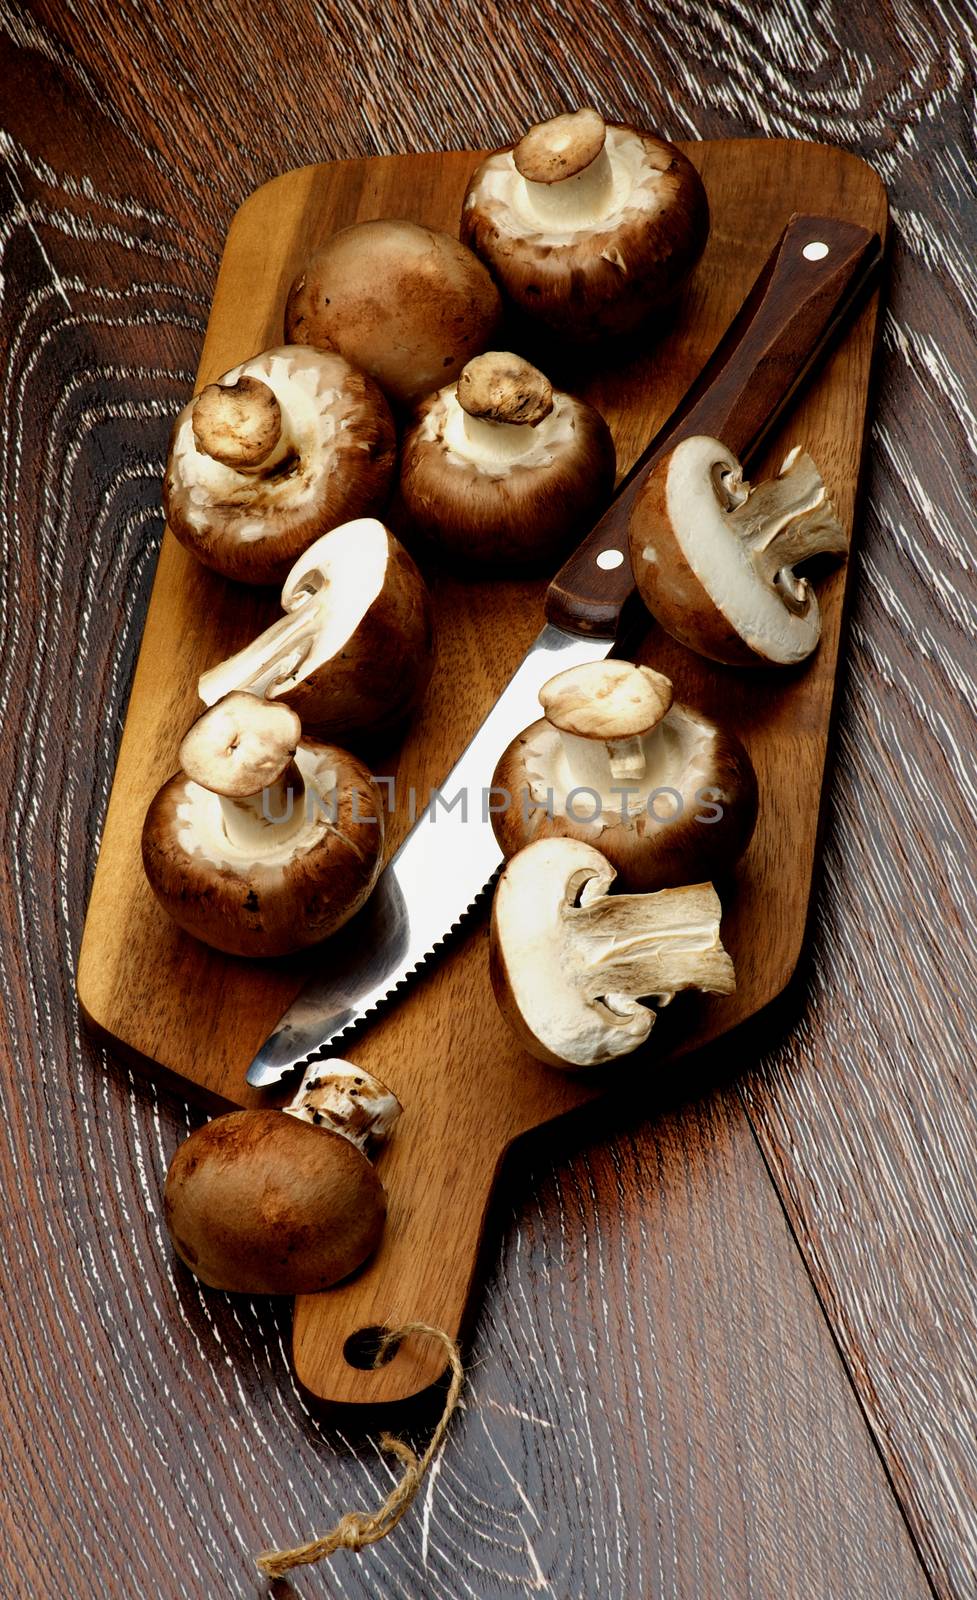 Gourmet Raw Portabello Mushrooms Full Body and Halves with Table Knife on Cutting Board closeup on Dark Wooden background